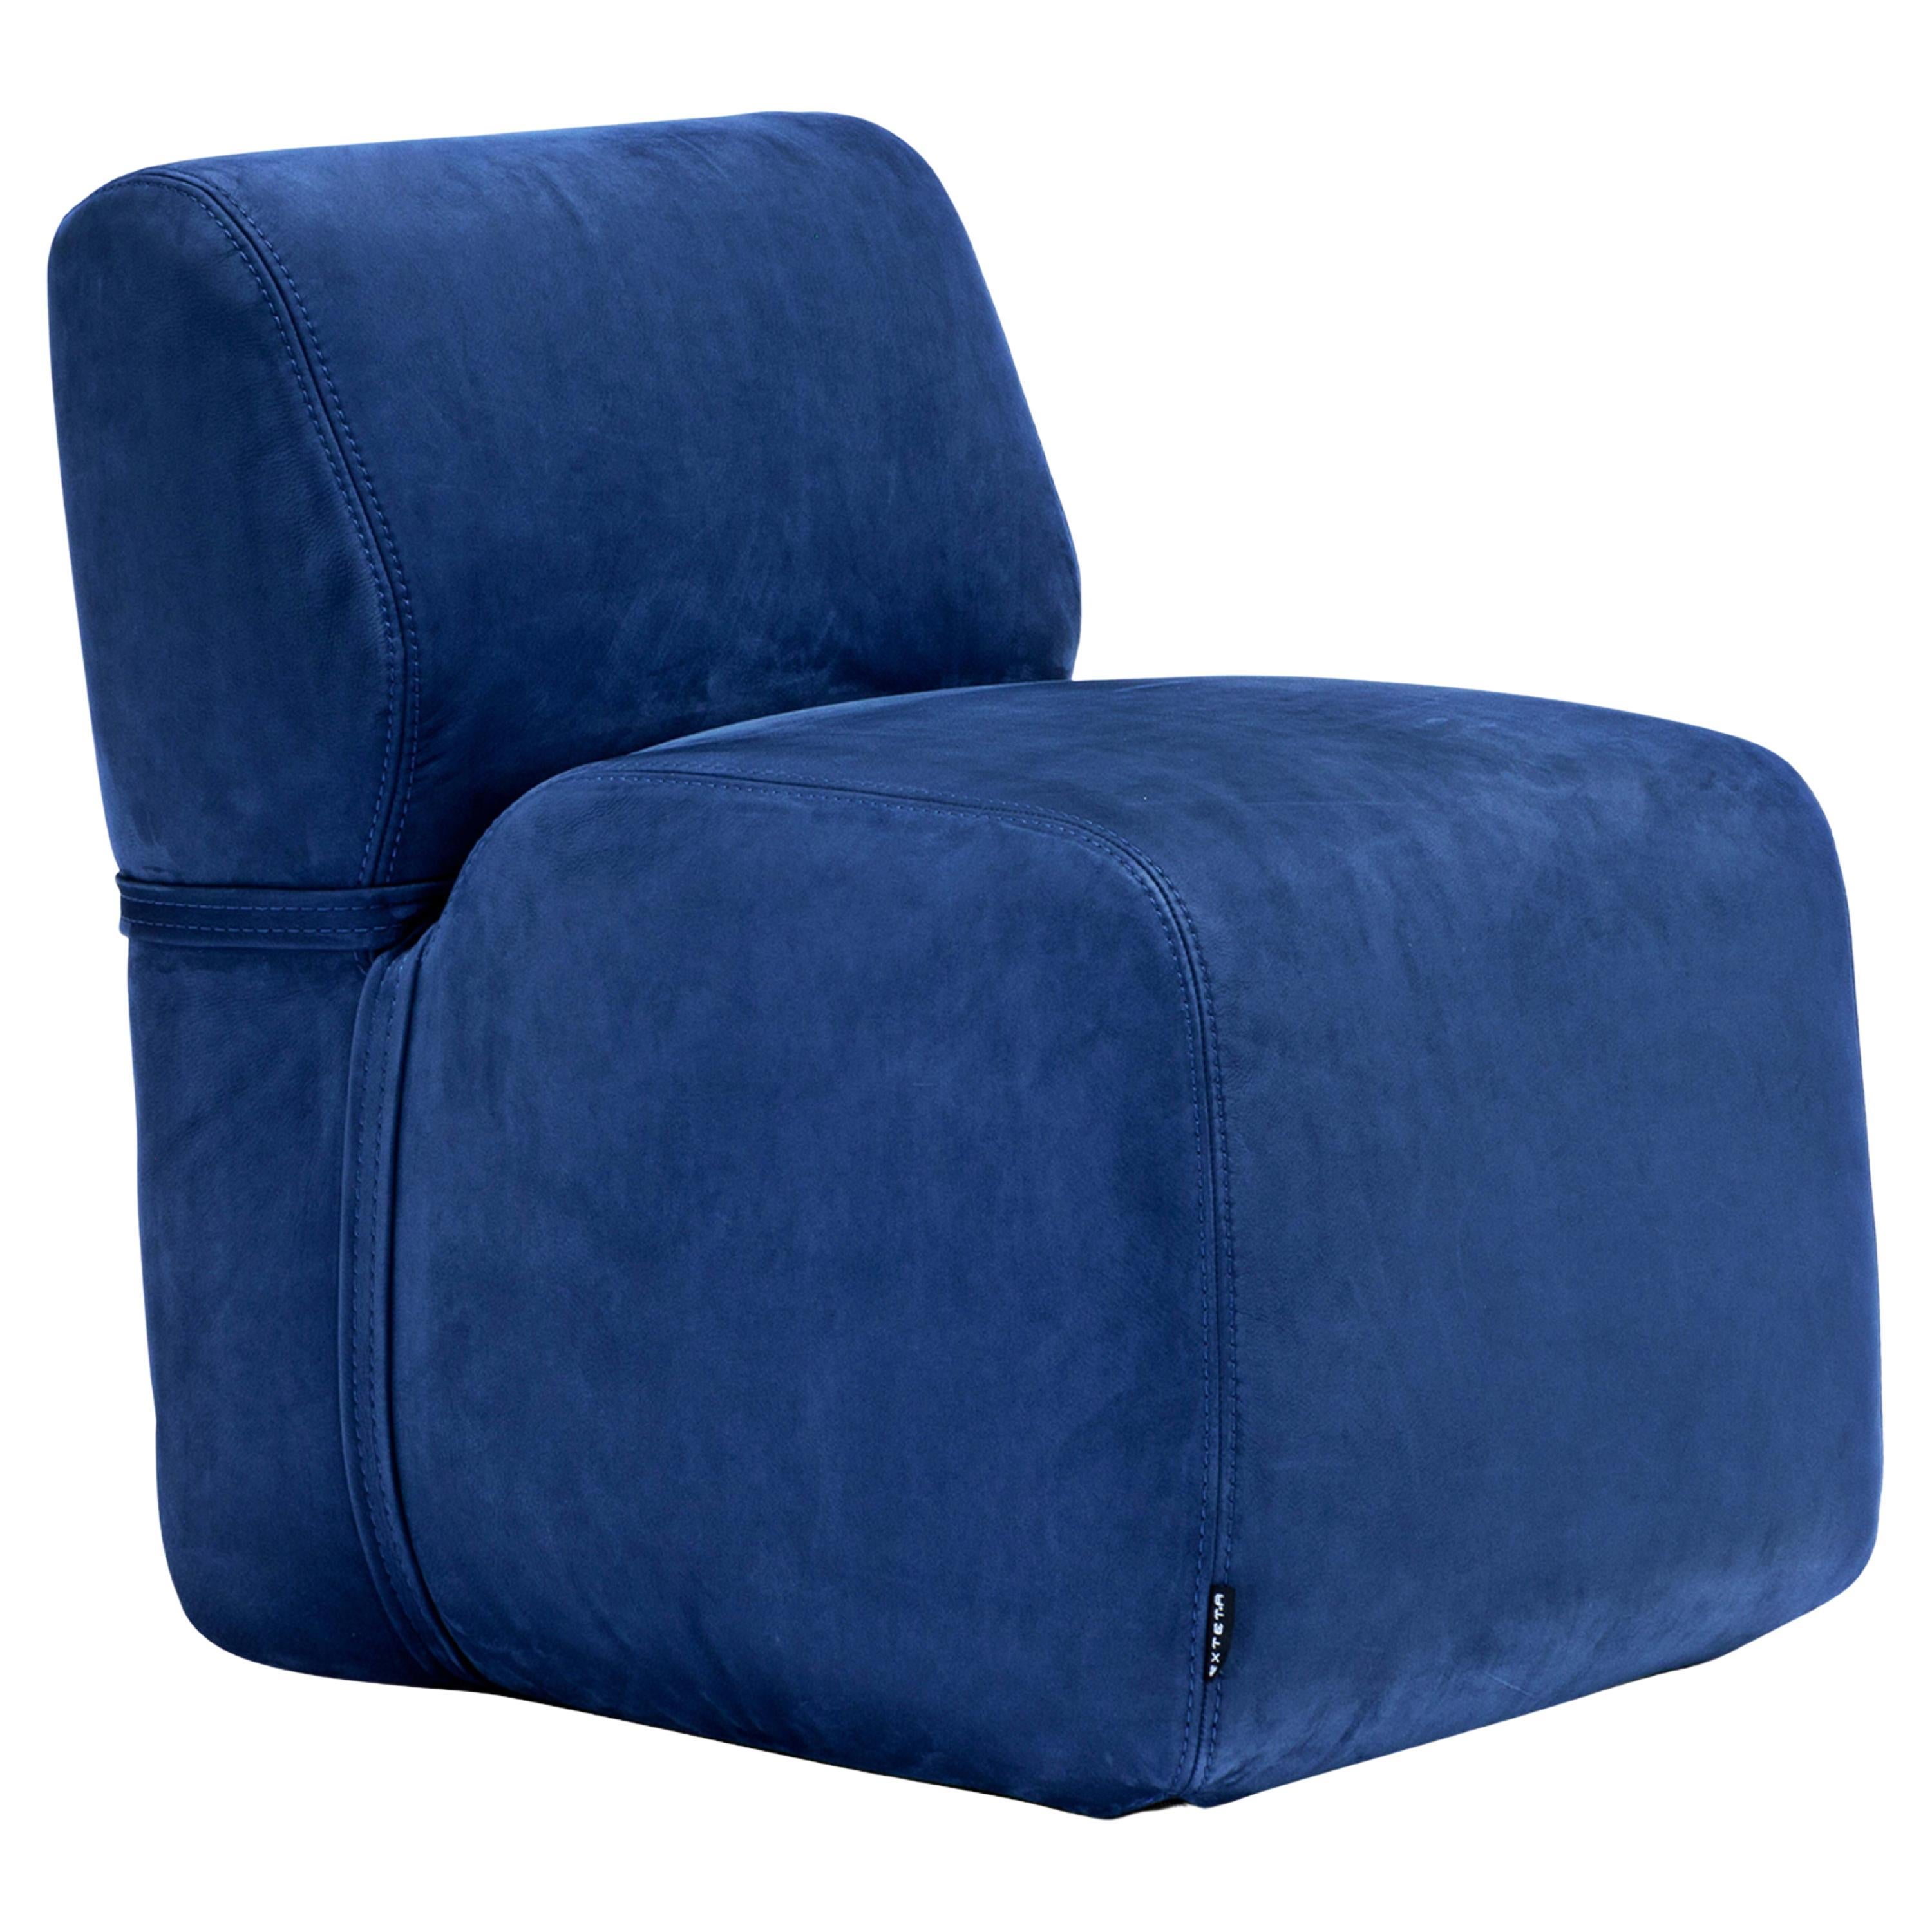 Soft Small Blue Lounge Chair For Sale